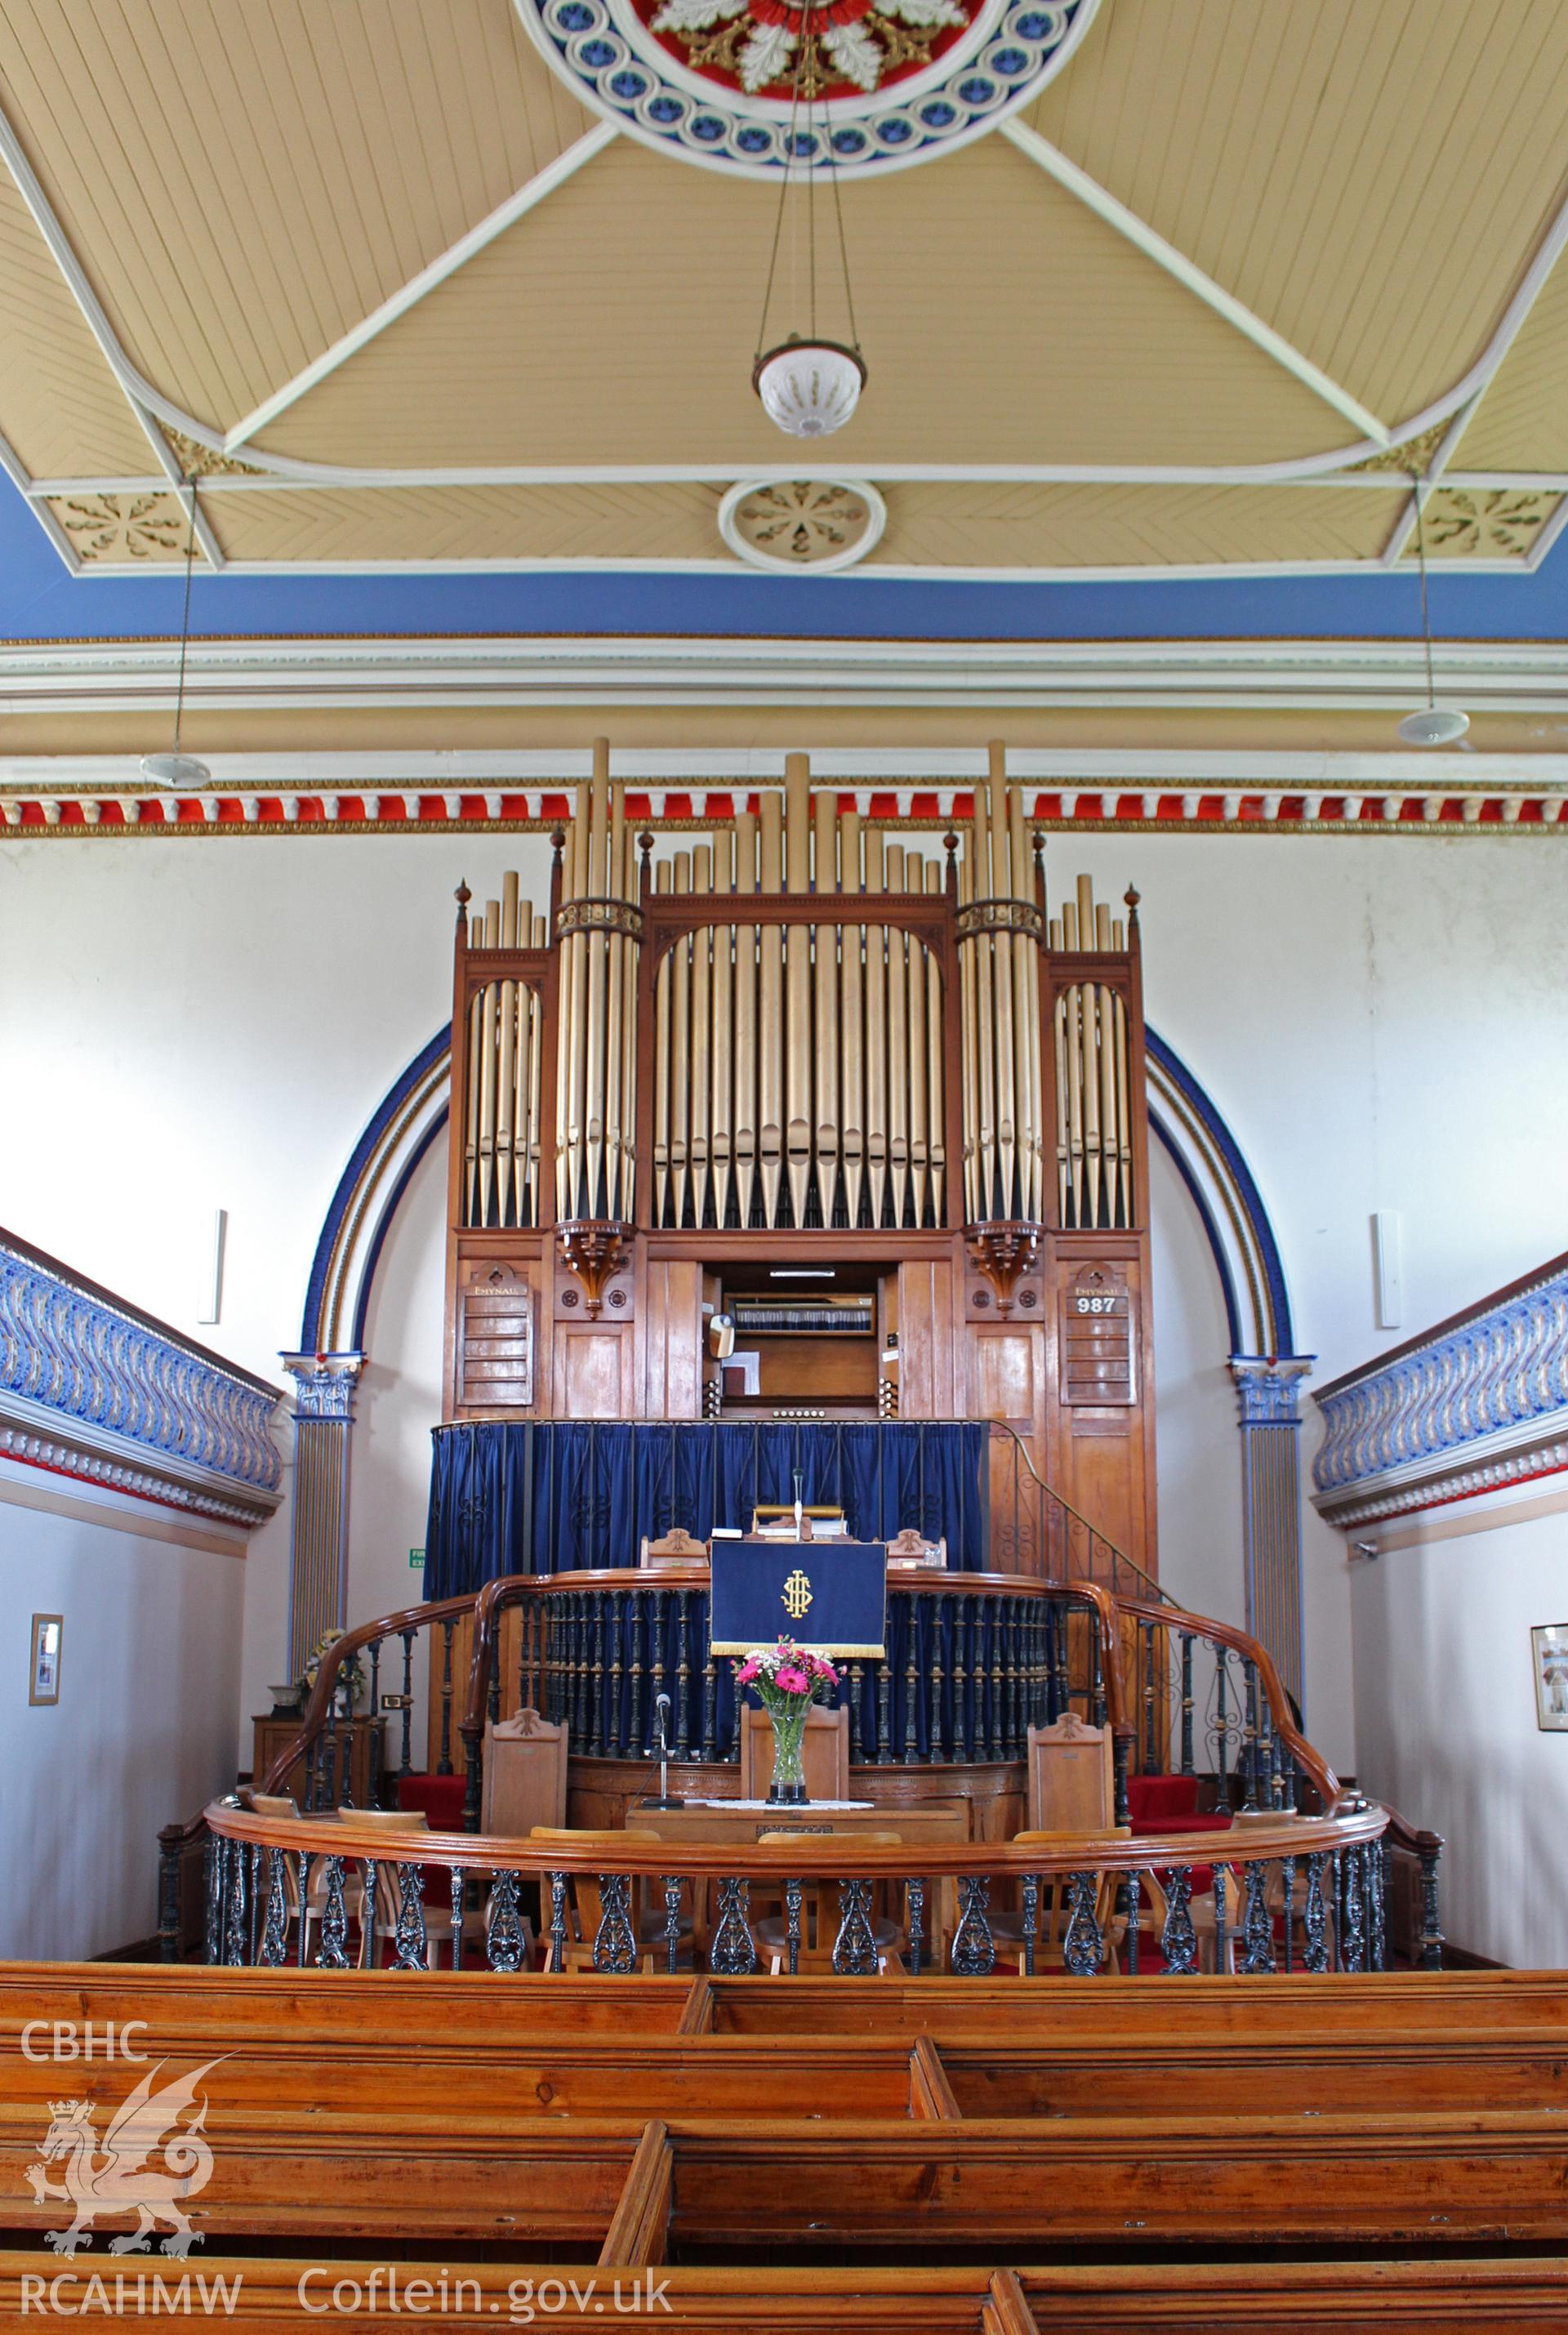 Interior view showing organ and pulpit. Photographic survey of Seion Welsh Baptist Chapel, Morriston, conducted by Sue Fielding on 13th May 2017.